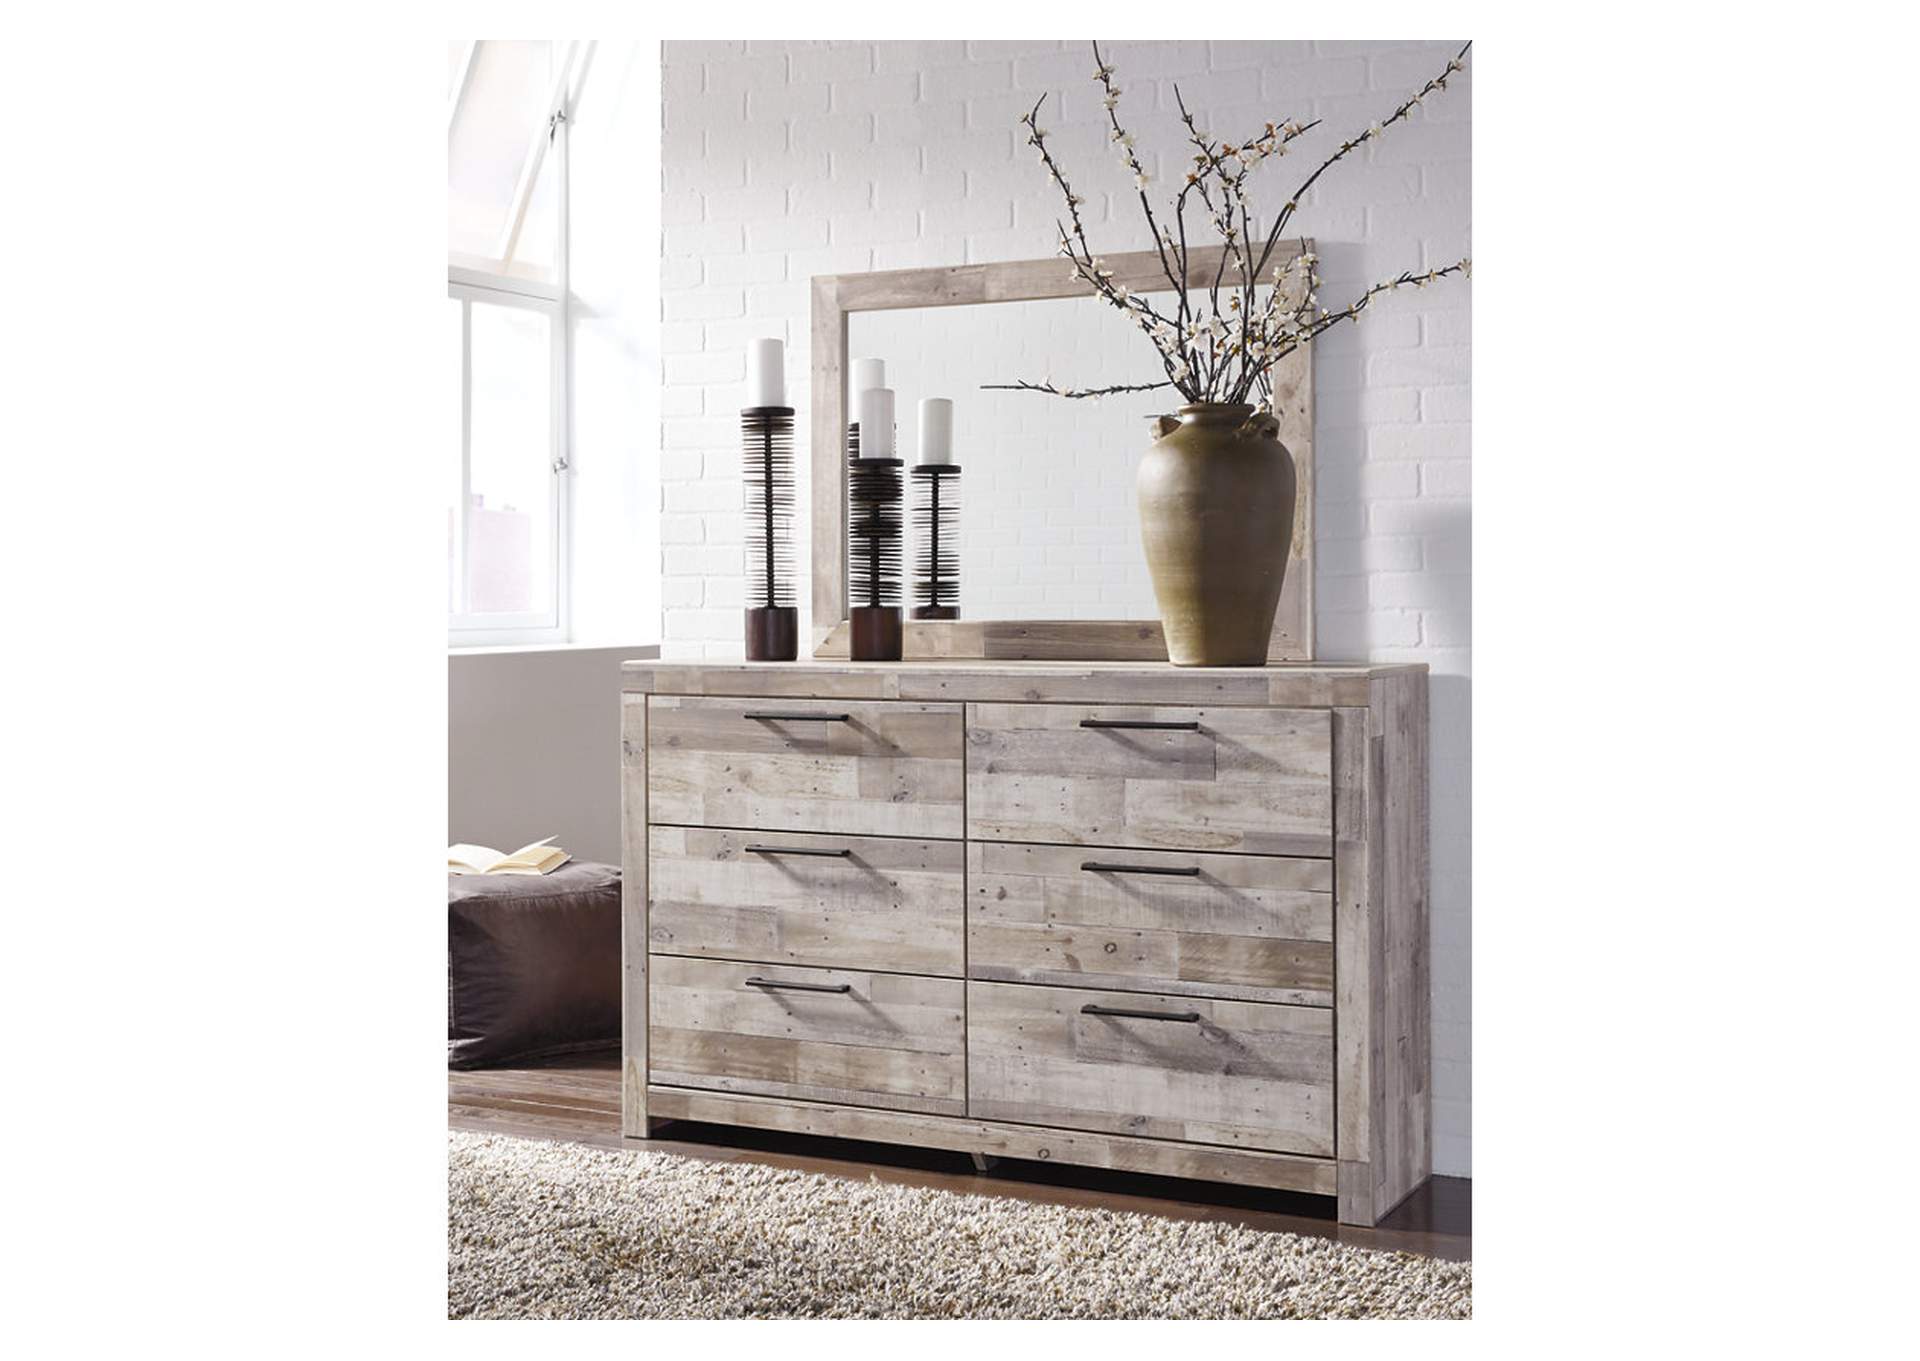 Effie King Panel Bed with Mirrored Dresser, Chest and 2 Nightstands,Signature Design By Ashley